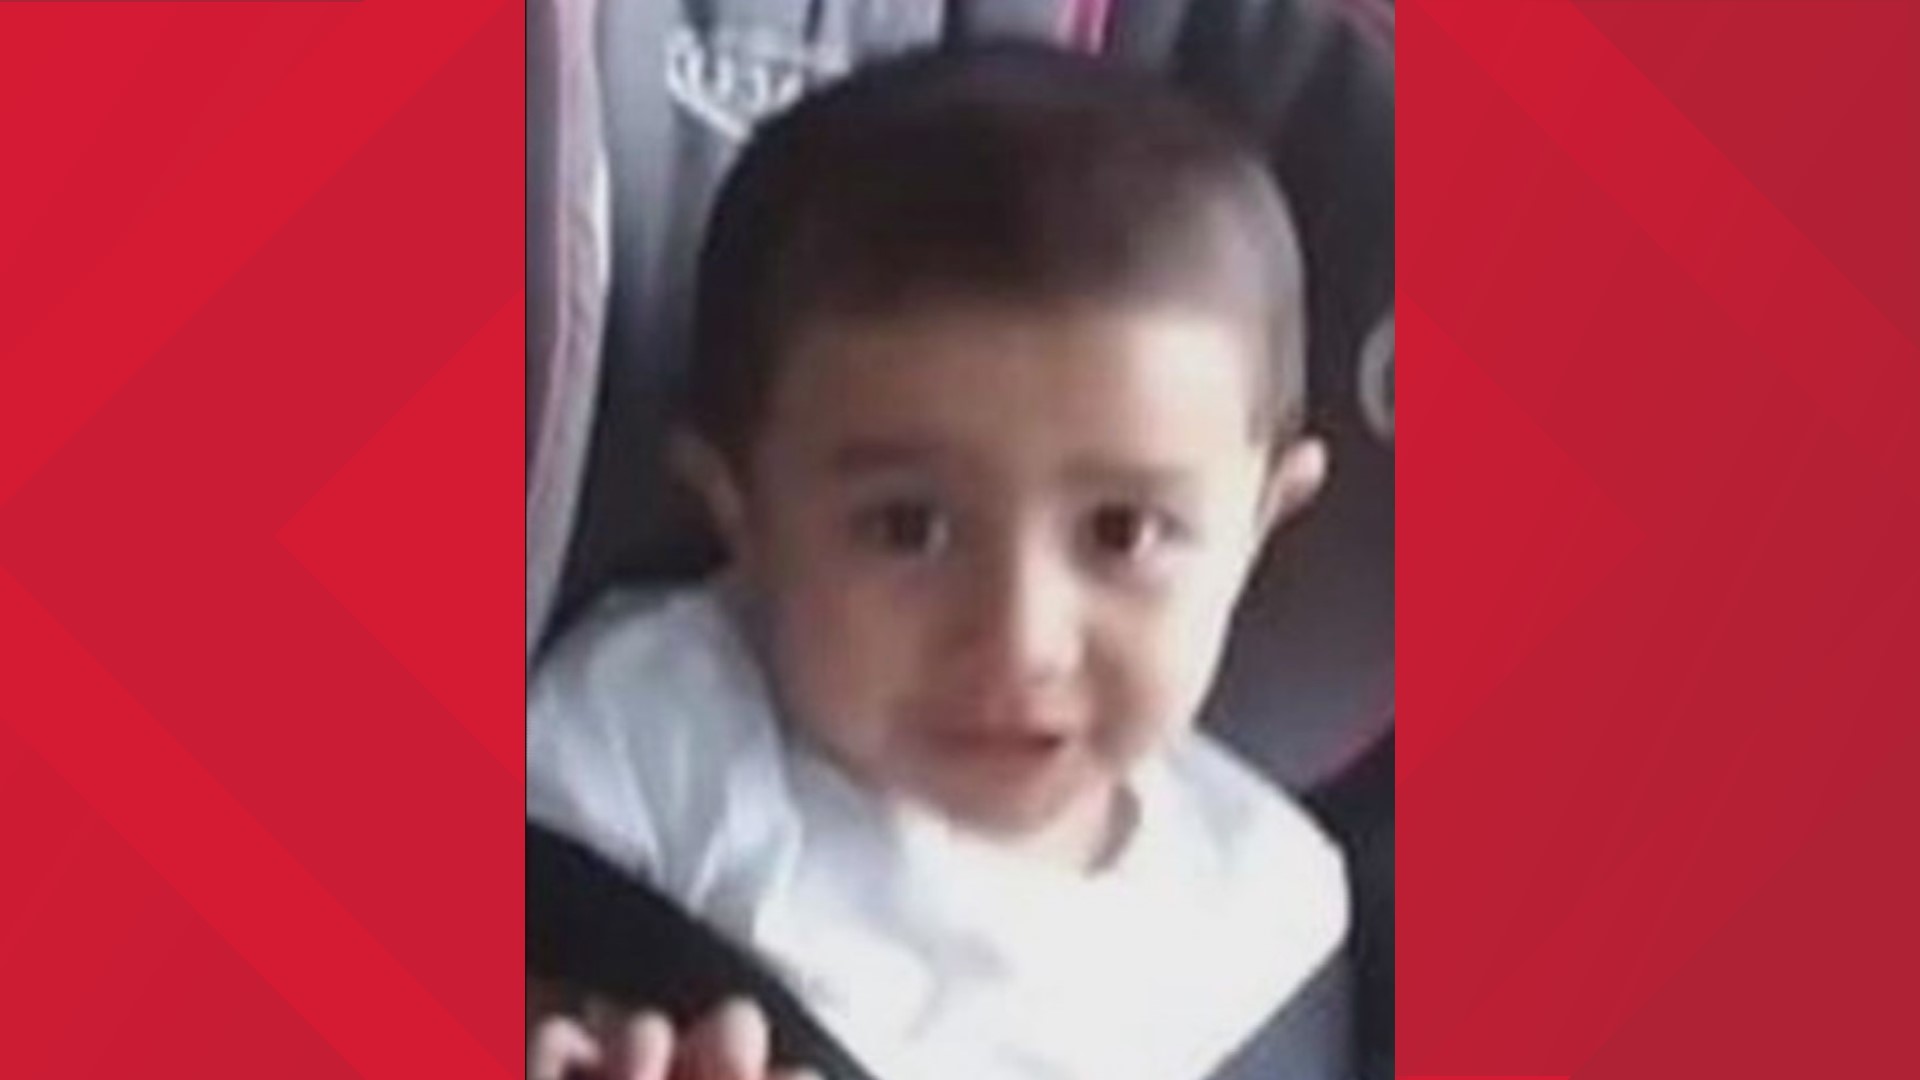 The 2-year-old at the center of an Amber Alert had been dead for several days when he was found in a dumpster behind a church June 2.